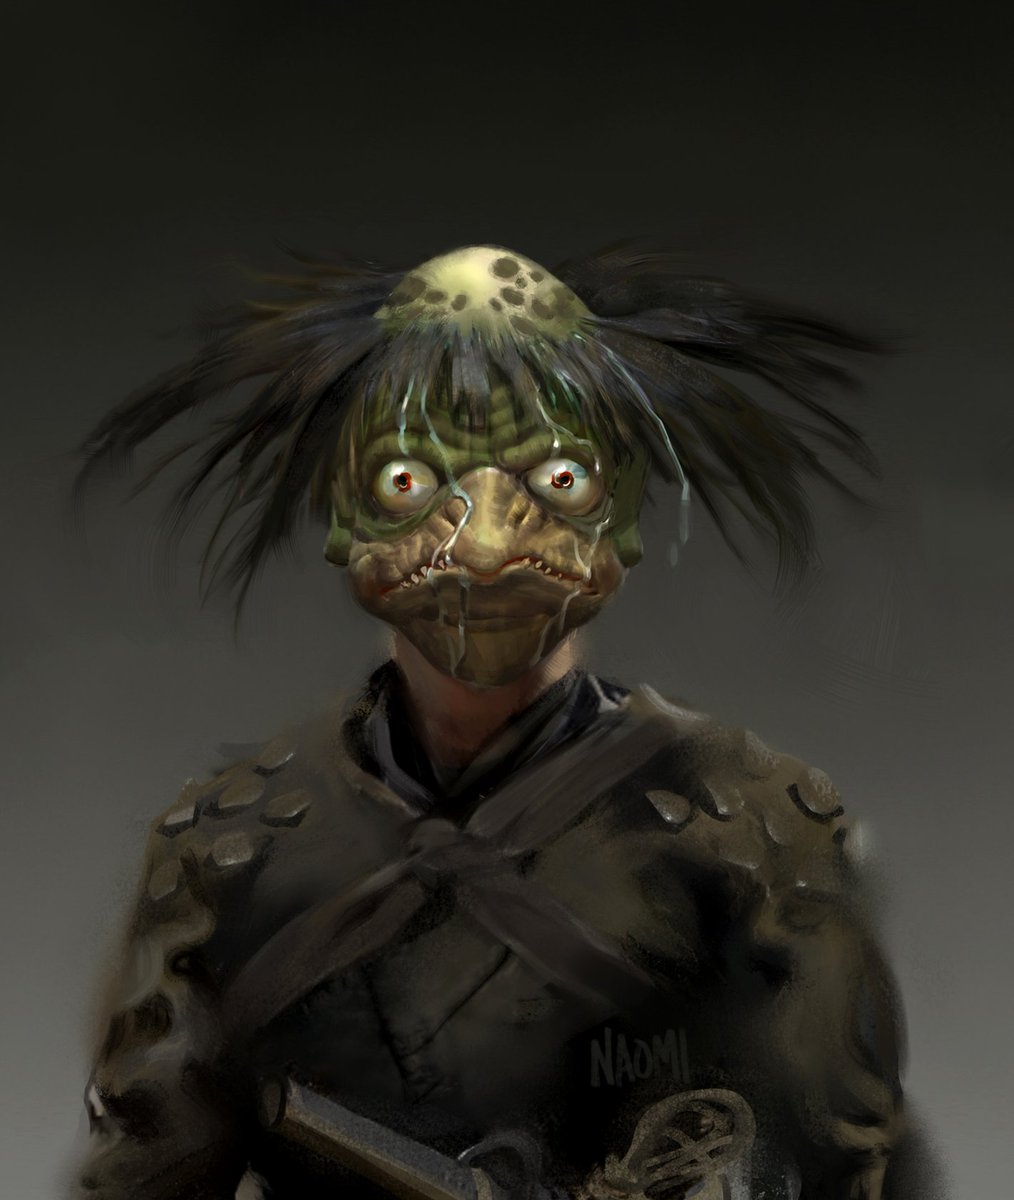 Overbevisende handicap Forvirrede Naomi Baker on Twitter: "I designed a Kappa mask you can wear while playing  #GhostofTsushimaLegends mode. It comes in many colors. Thank you SP team  for letting me do this, haha. #GhostOfTsushima